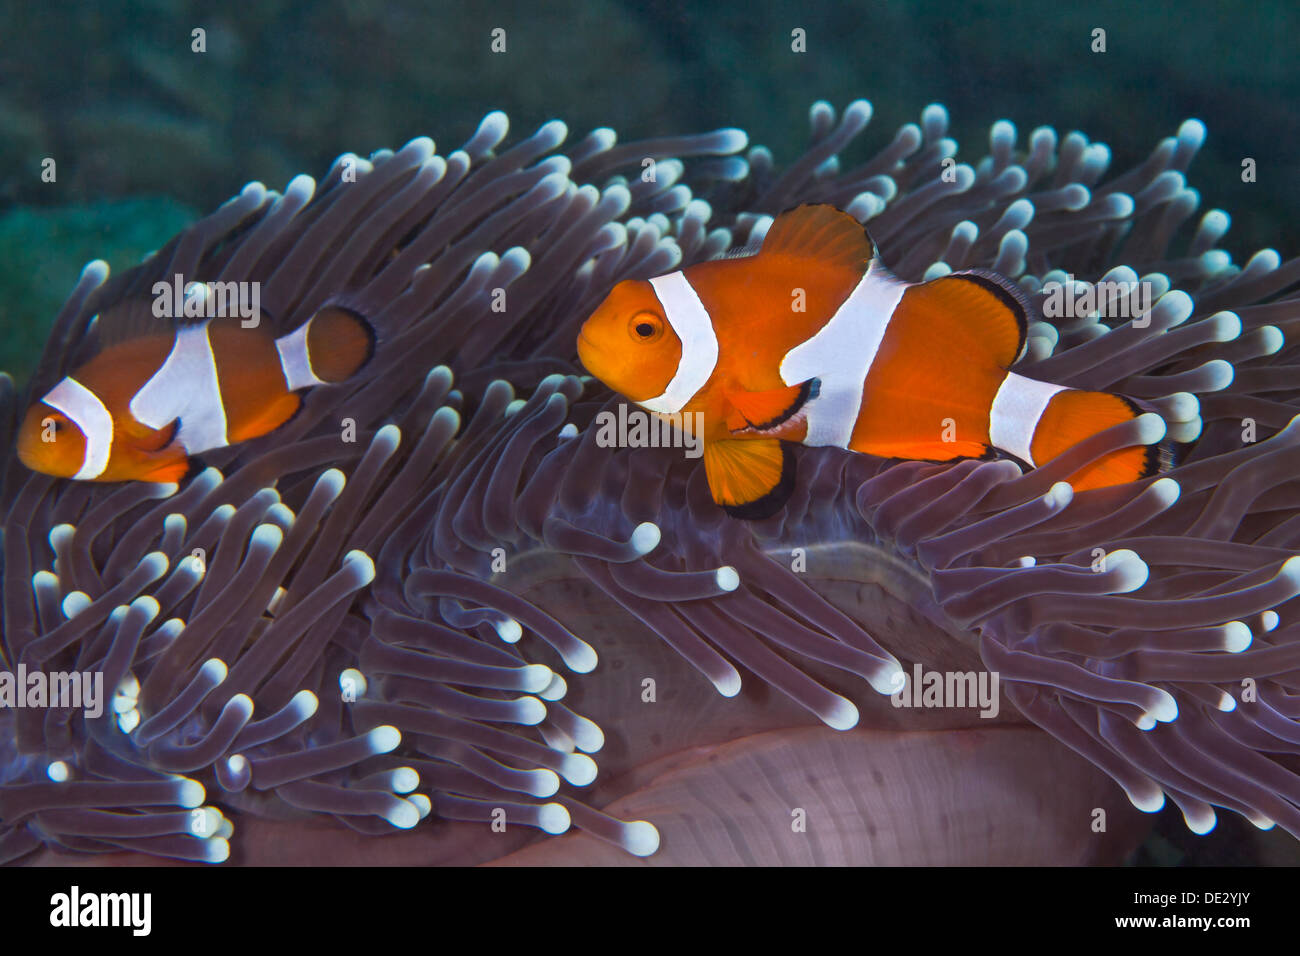 False clownfish, Amphiprion ocellaris nestling in purple tentacles of host anemone. Stock Photo